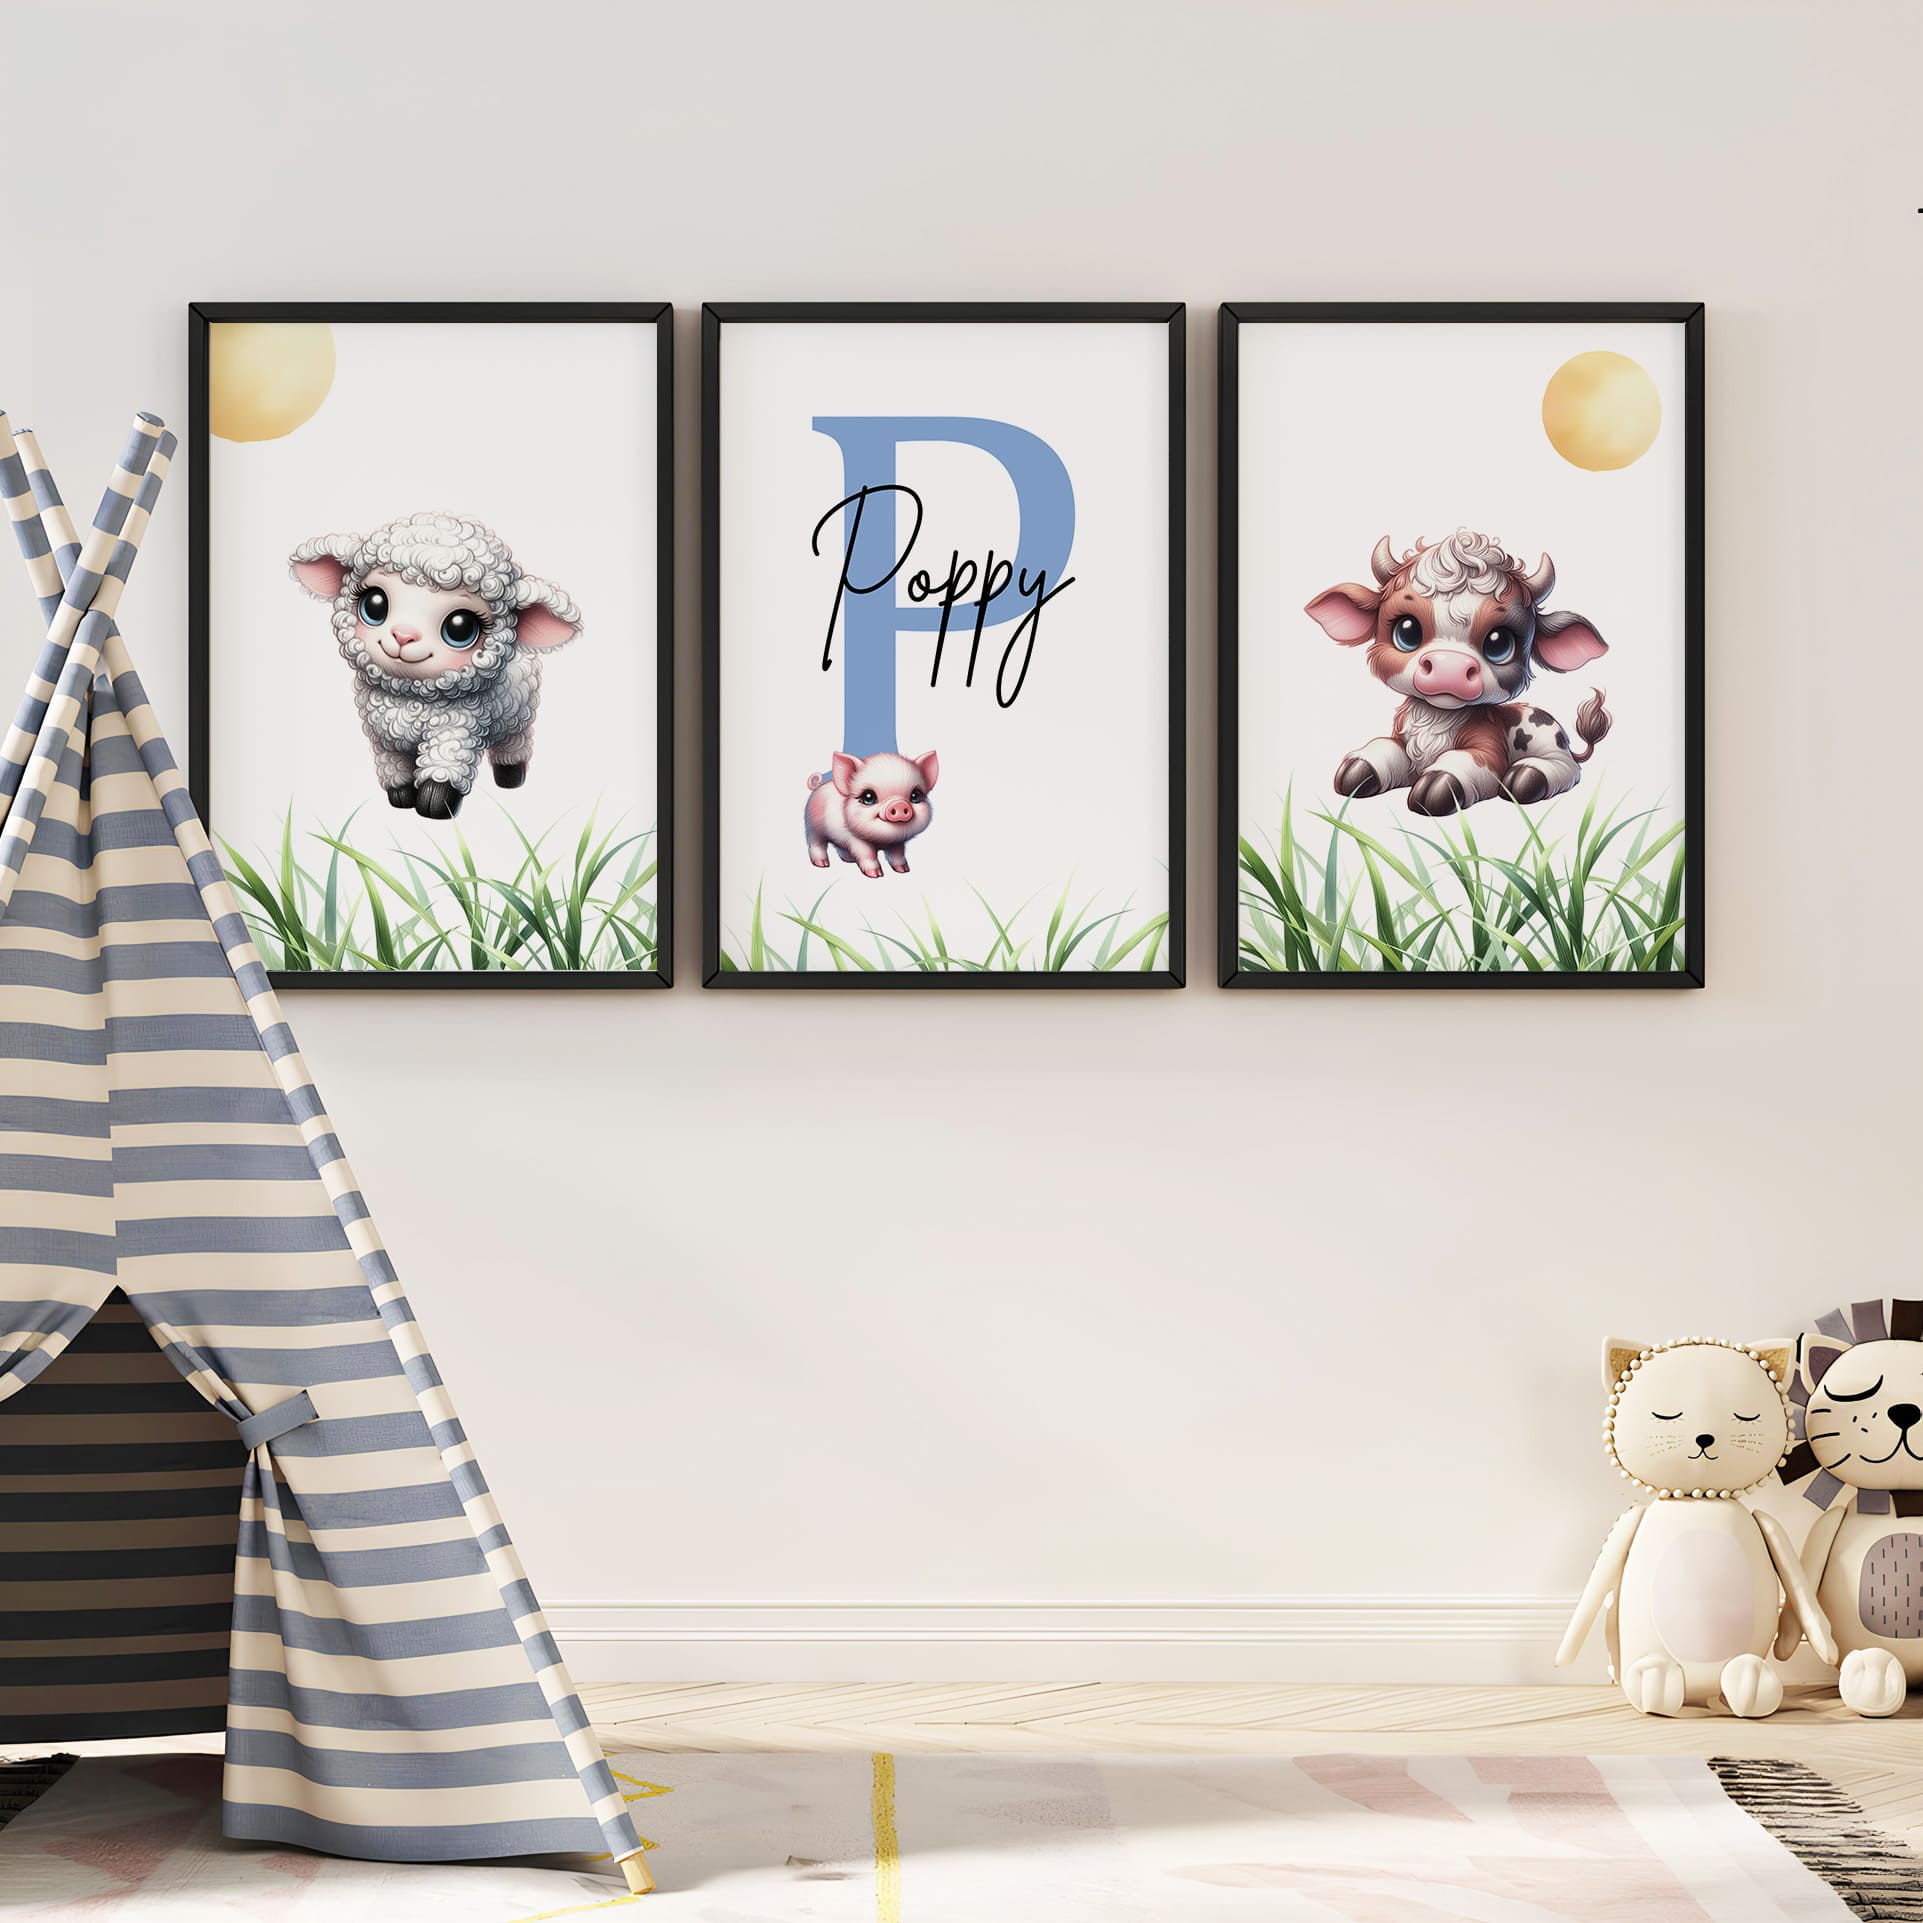 Set of three A4 prints featuring baby farm animals - cow, pig, and lamb. The animals are depicted in a cartoony, bright style resembling coloured pencil drawings. Each print depicts grass along the bottom and a sun above the animal. The middle print features a smaller animal than the others, with a large initial letter in the background. A personalised name in black overlays the initial letter.